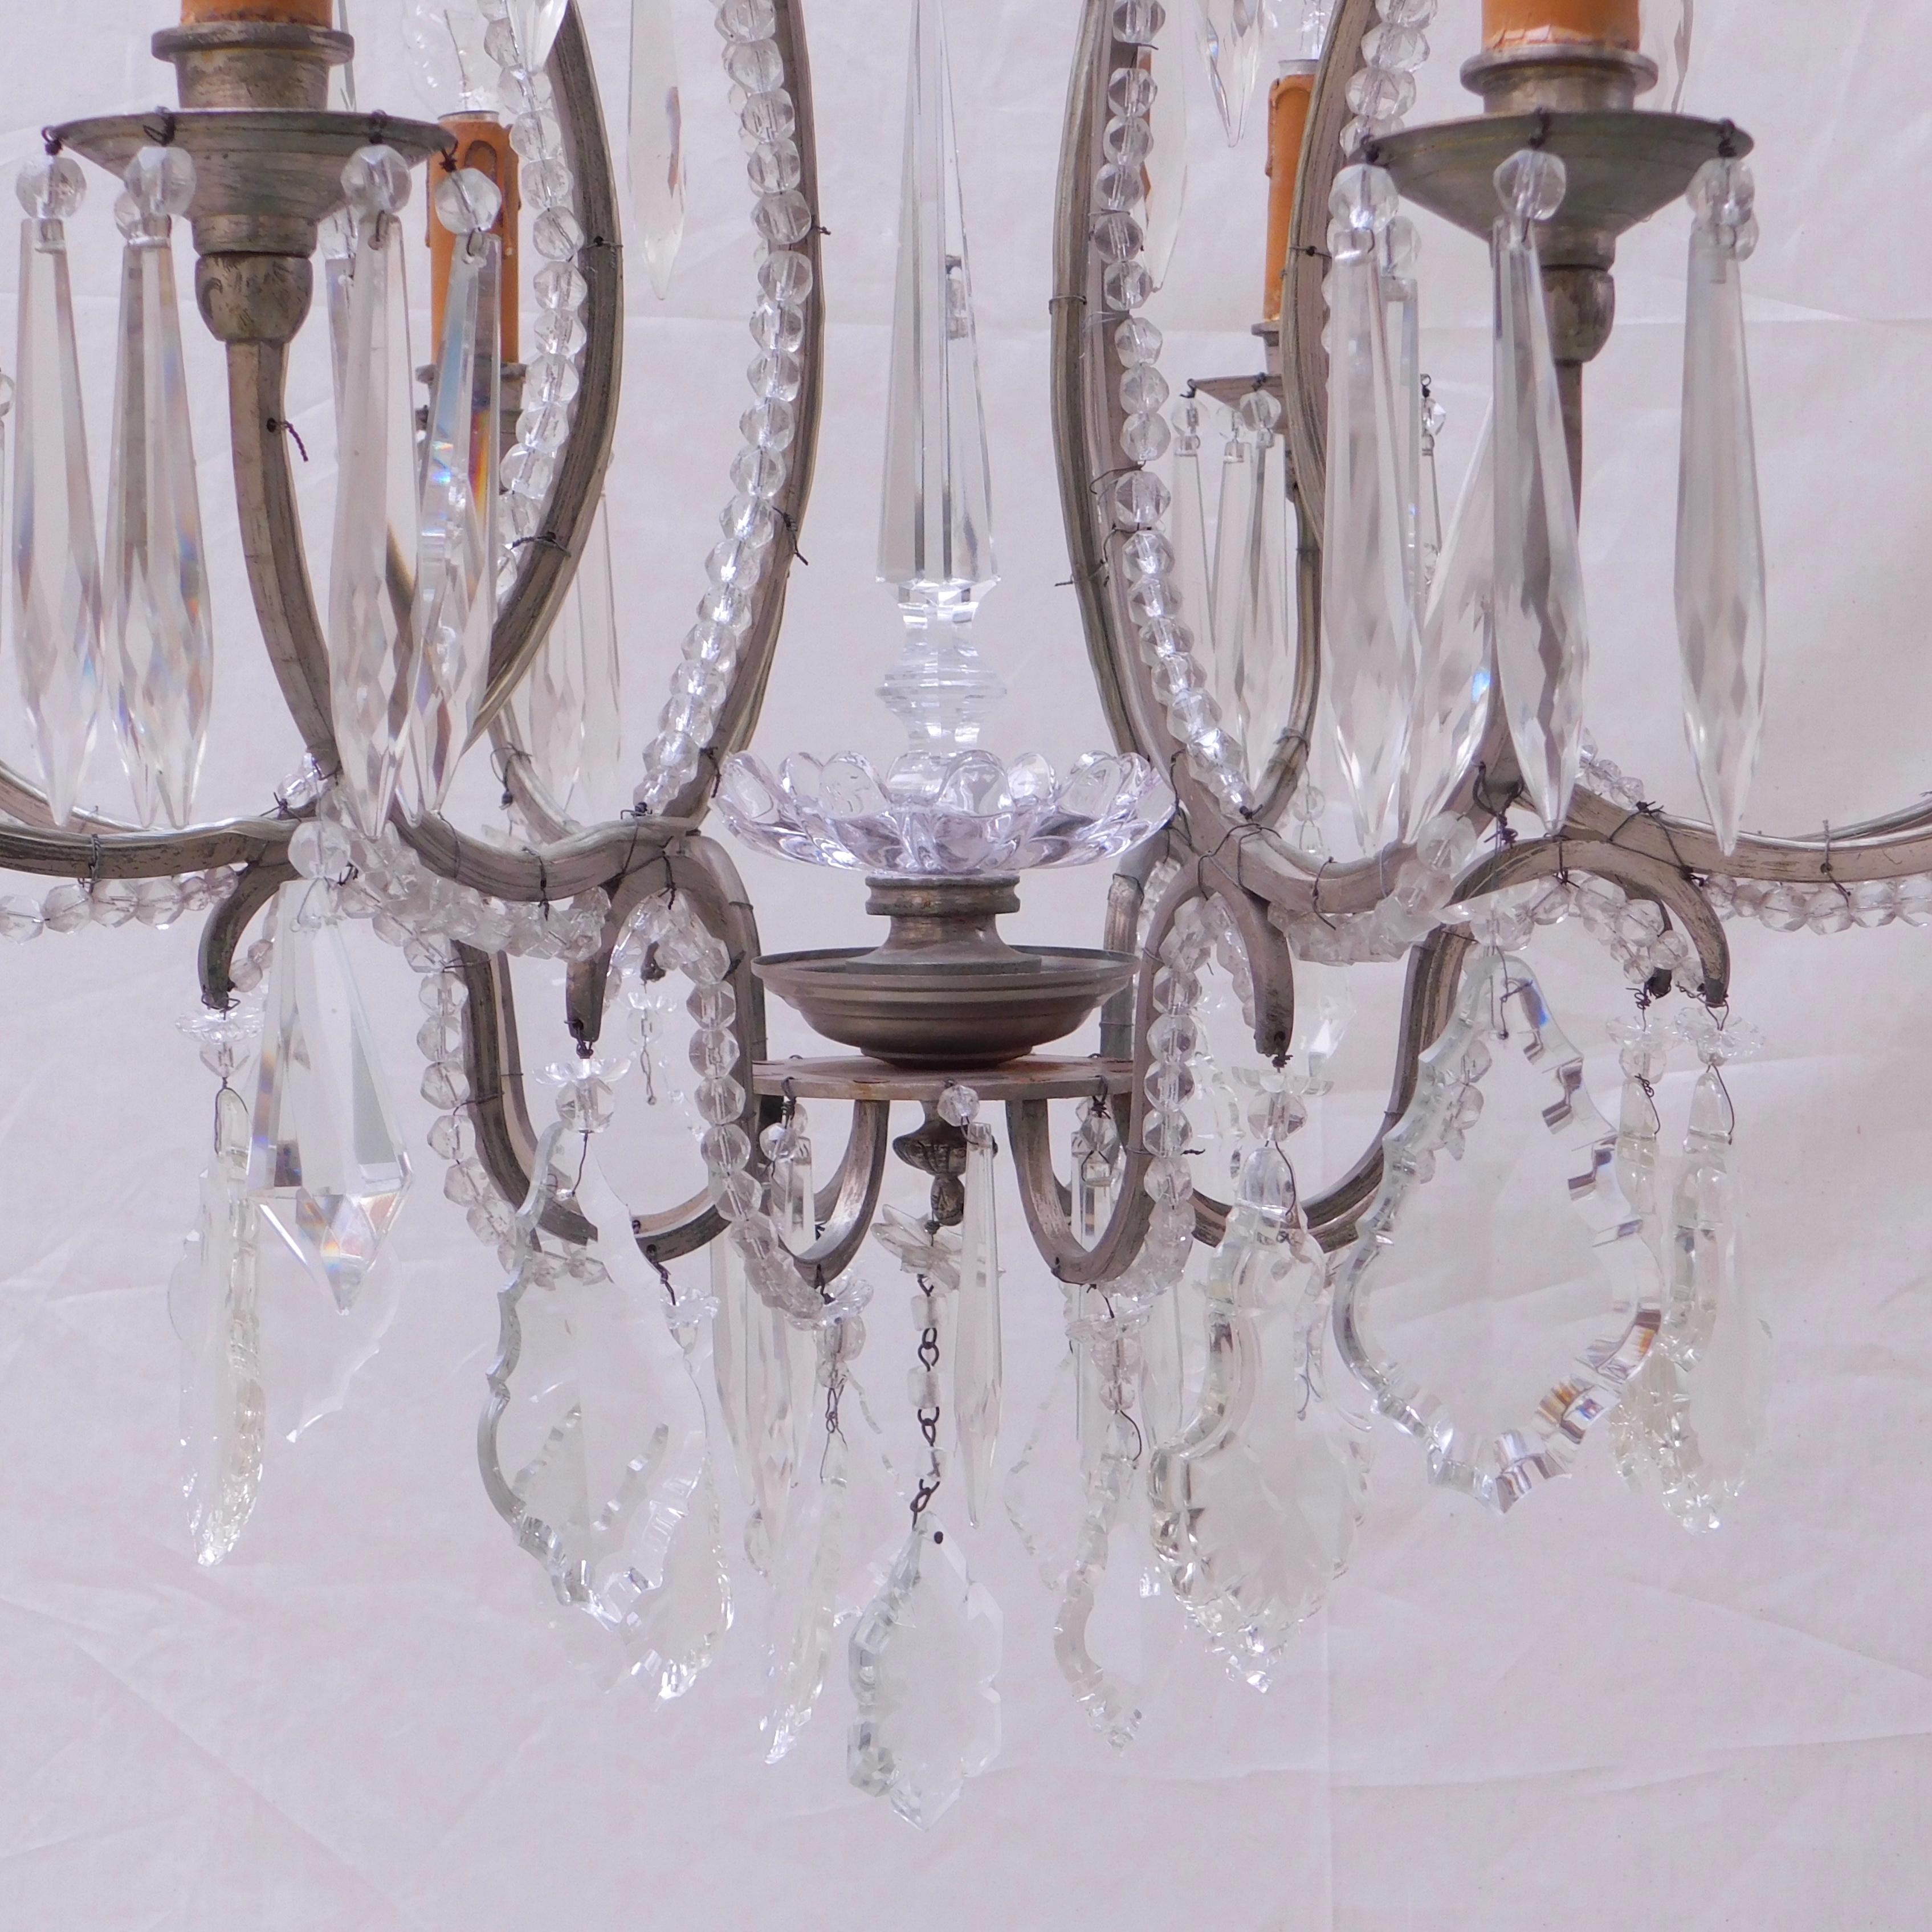 A most elegant Belgian chandelier with a silver plated metal frame beaded with prism cut glass beads and hanging crystal prisms. Wired and ready to hang.
The height listed is to the top of the ceiling cap canopy.